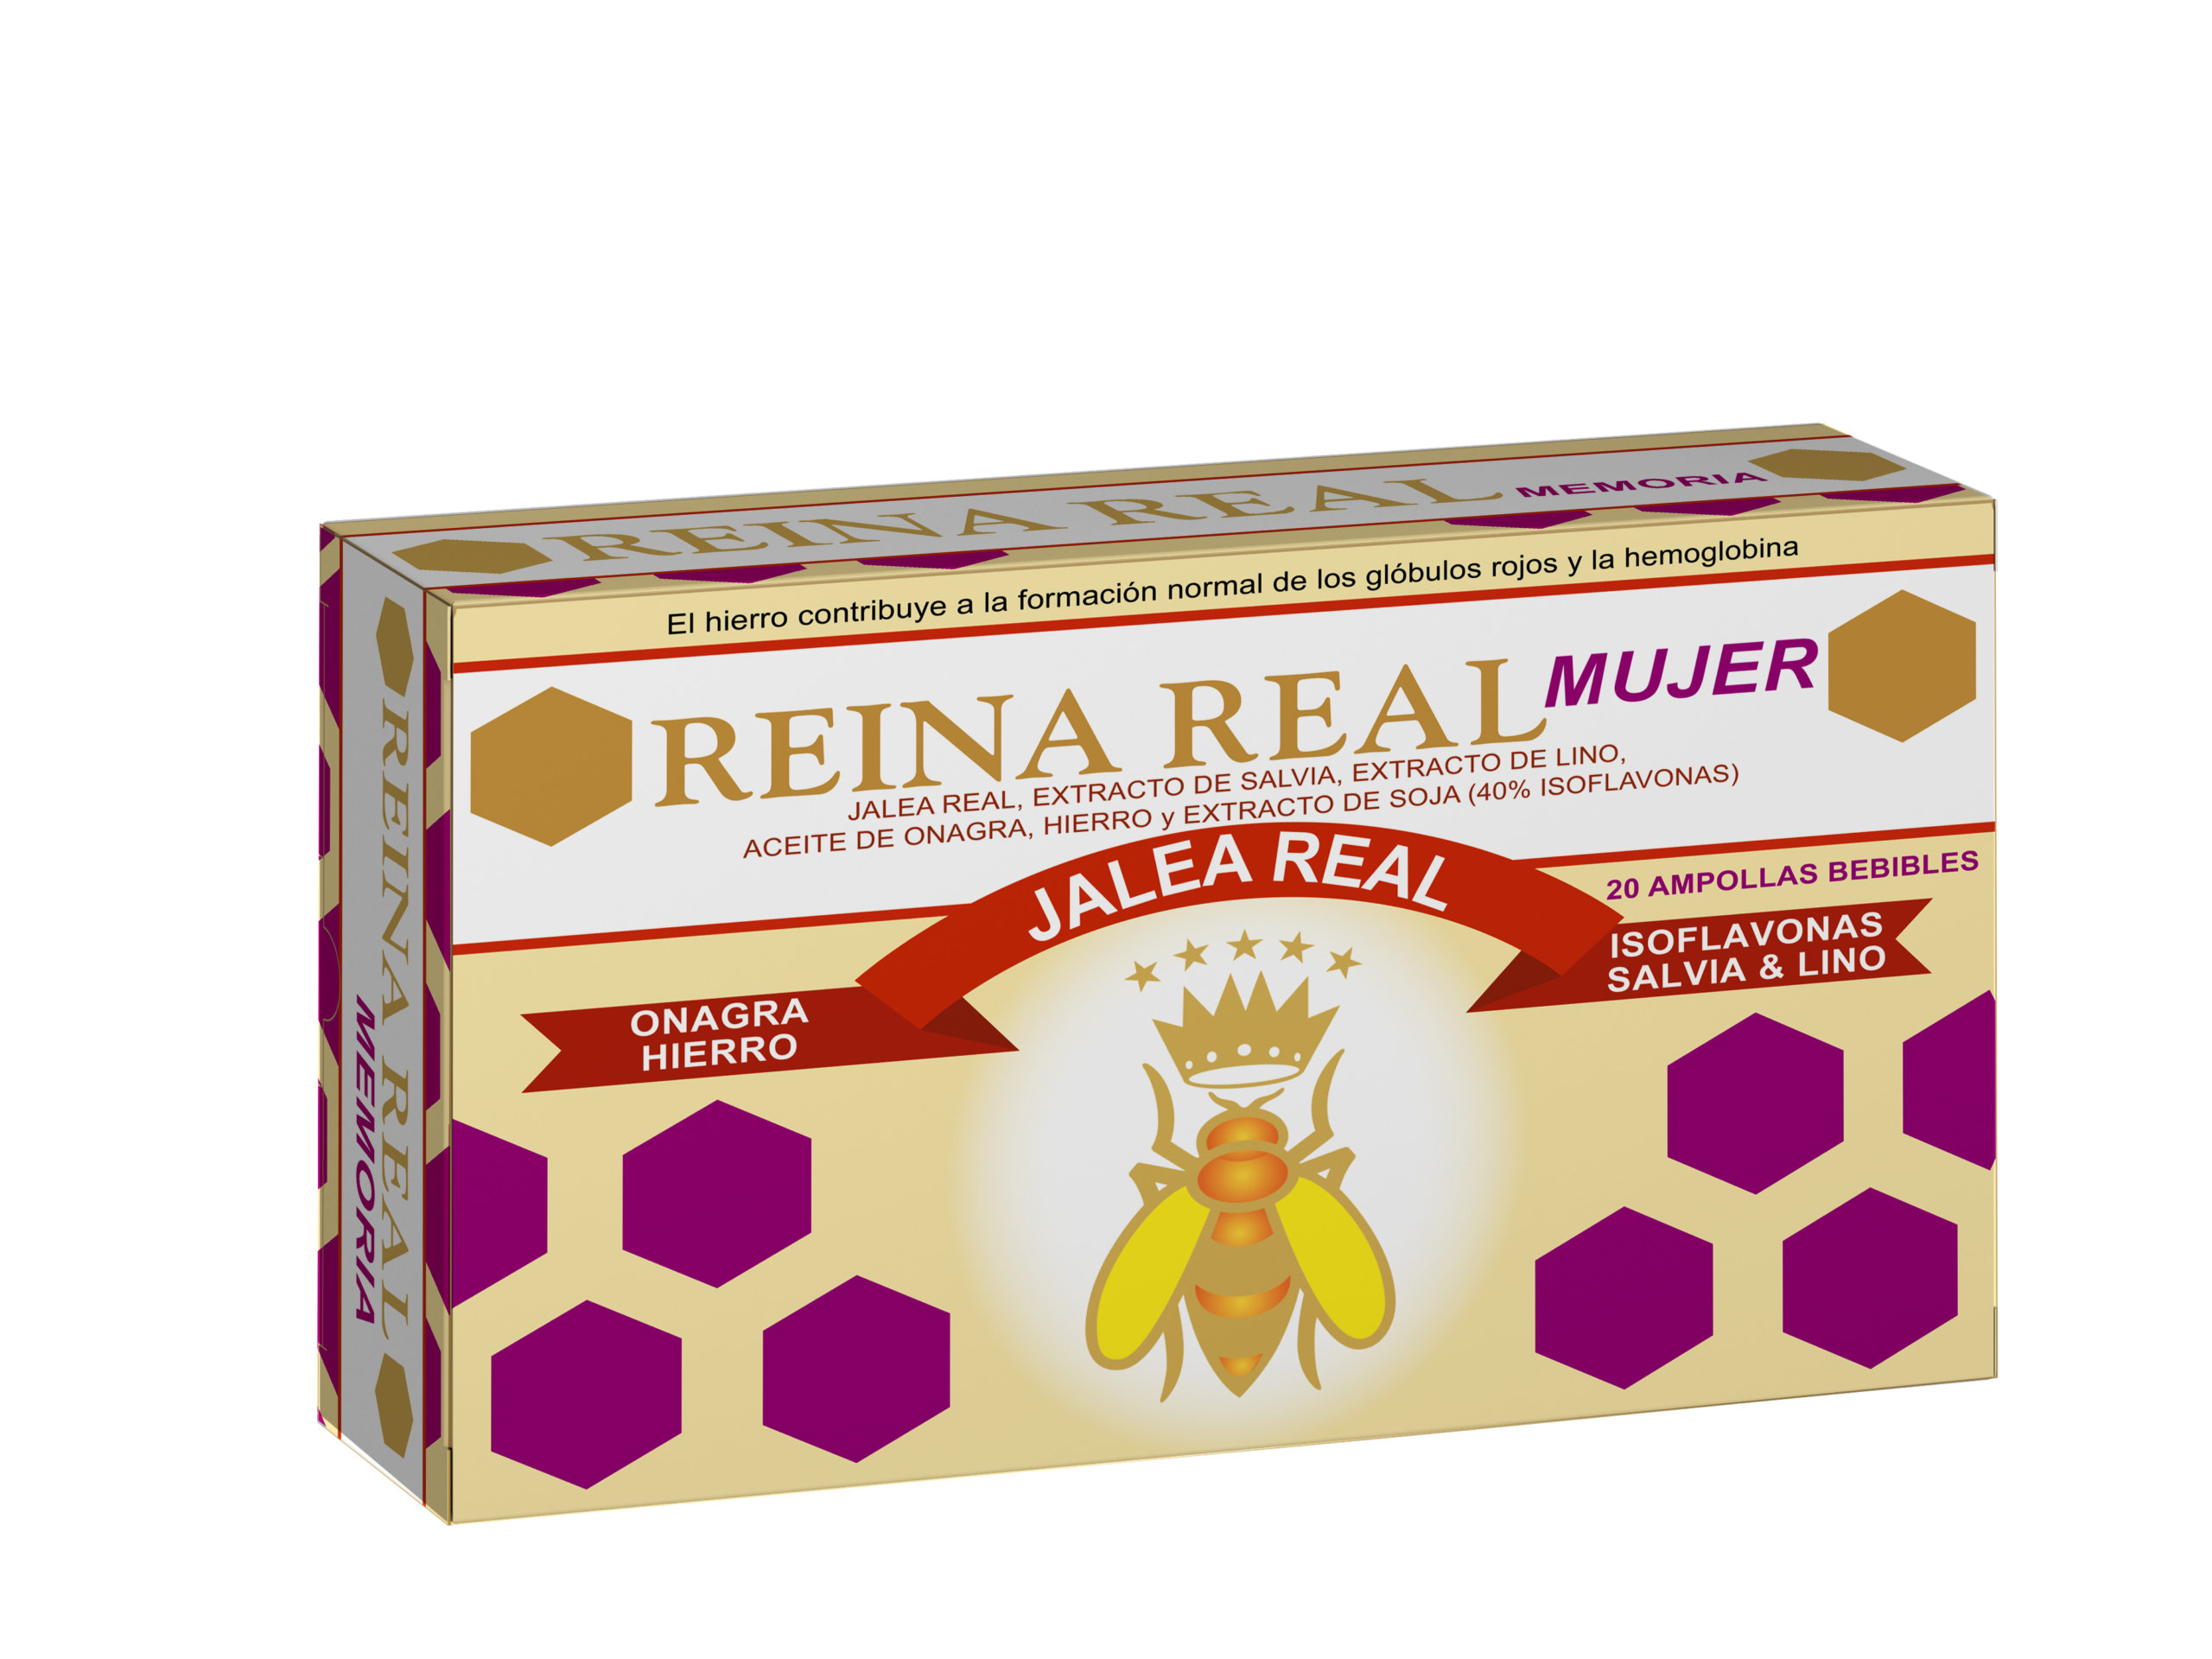 Reina Real Mujer (Mulher)